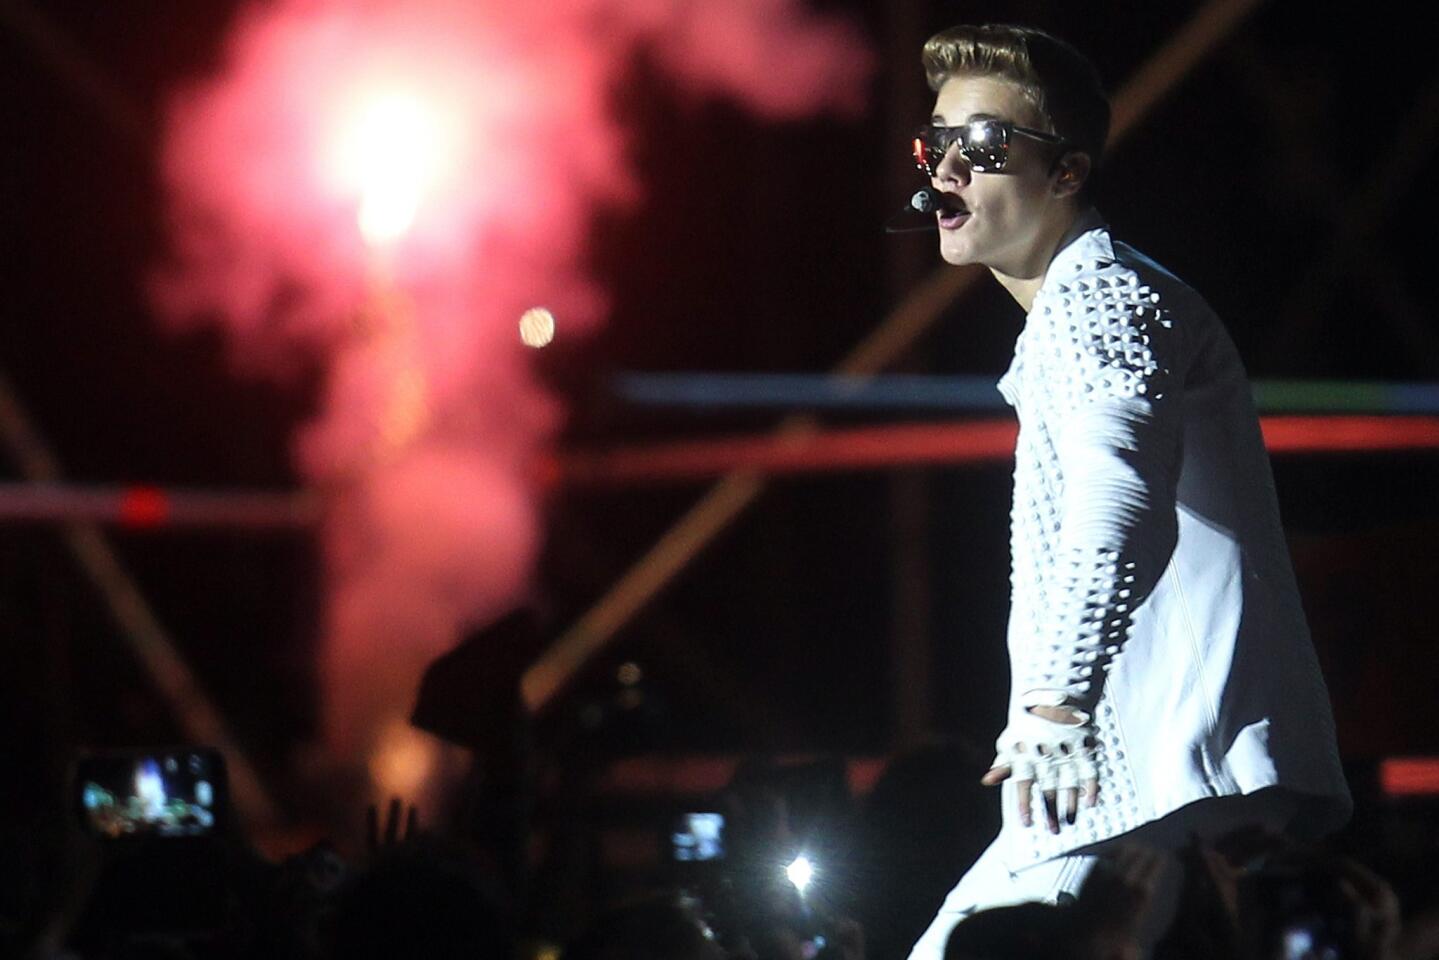 Justin Bieber abandons Buenos Aires crowd, cites food poisoning